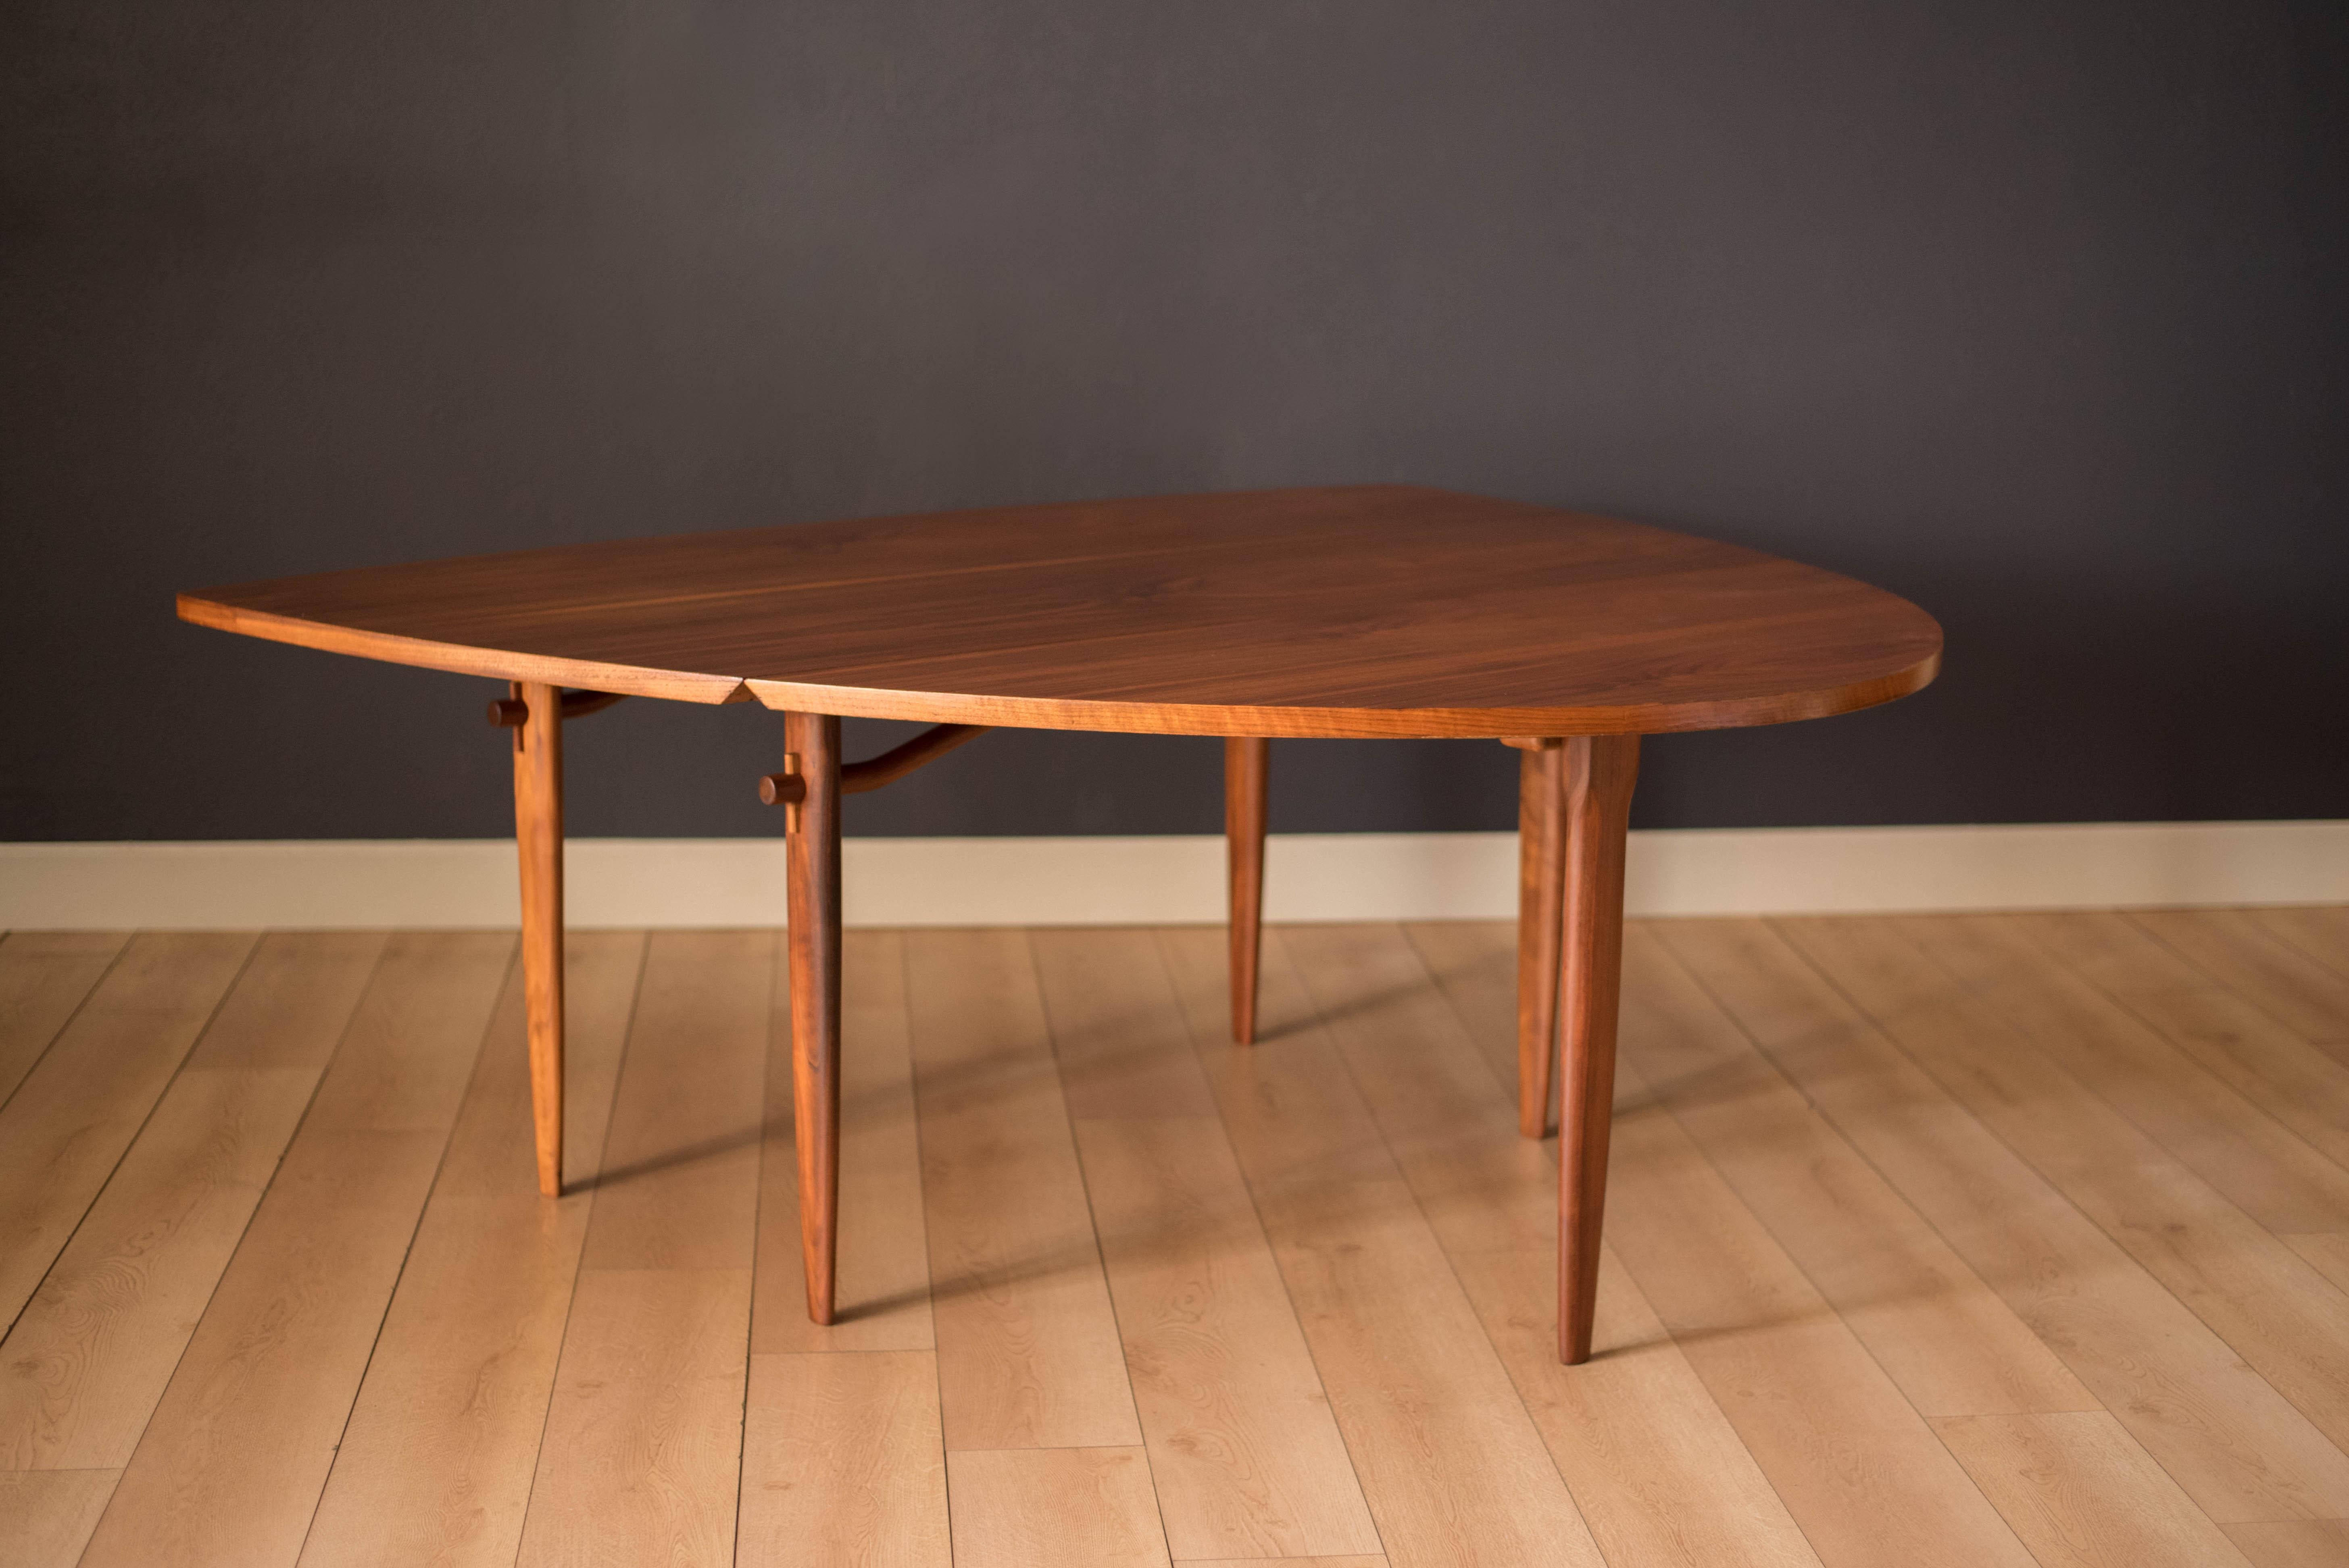 Mid-Century Modern drop leaf dining table designed by George Nakashima for the 